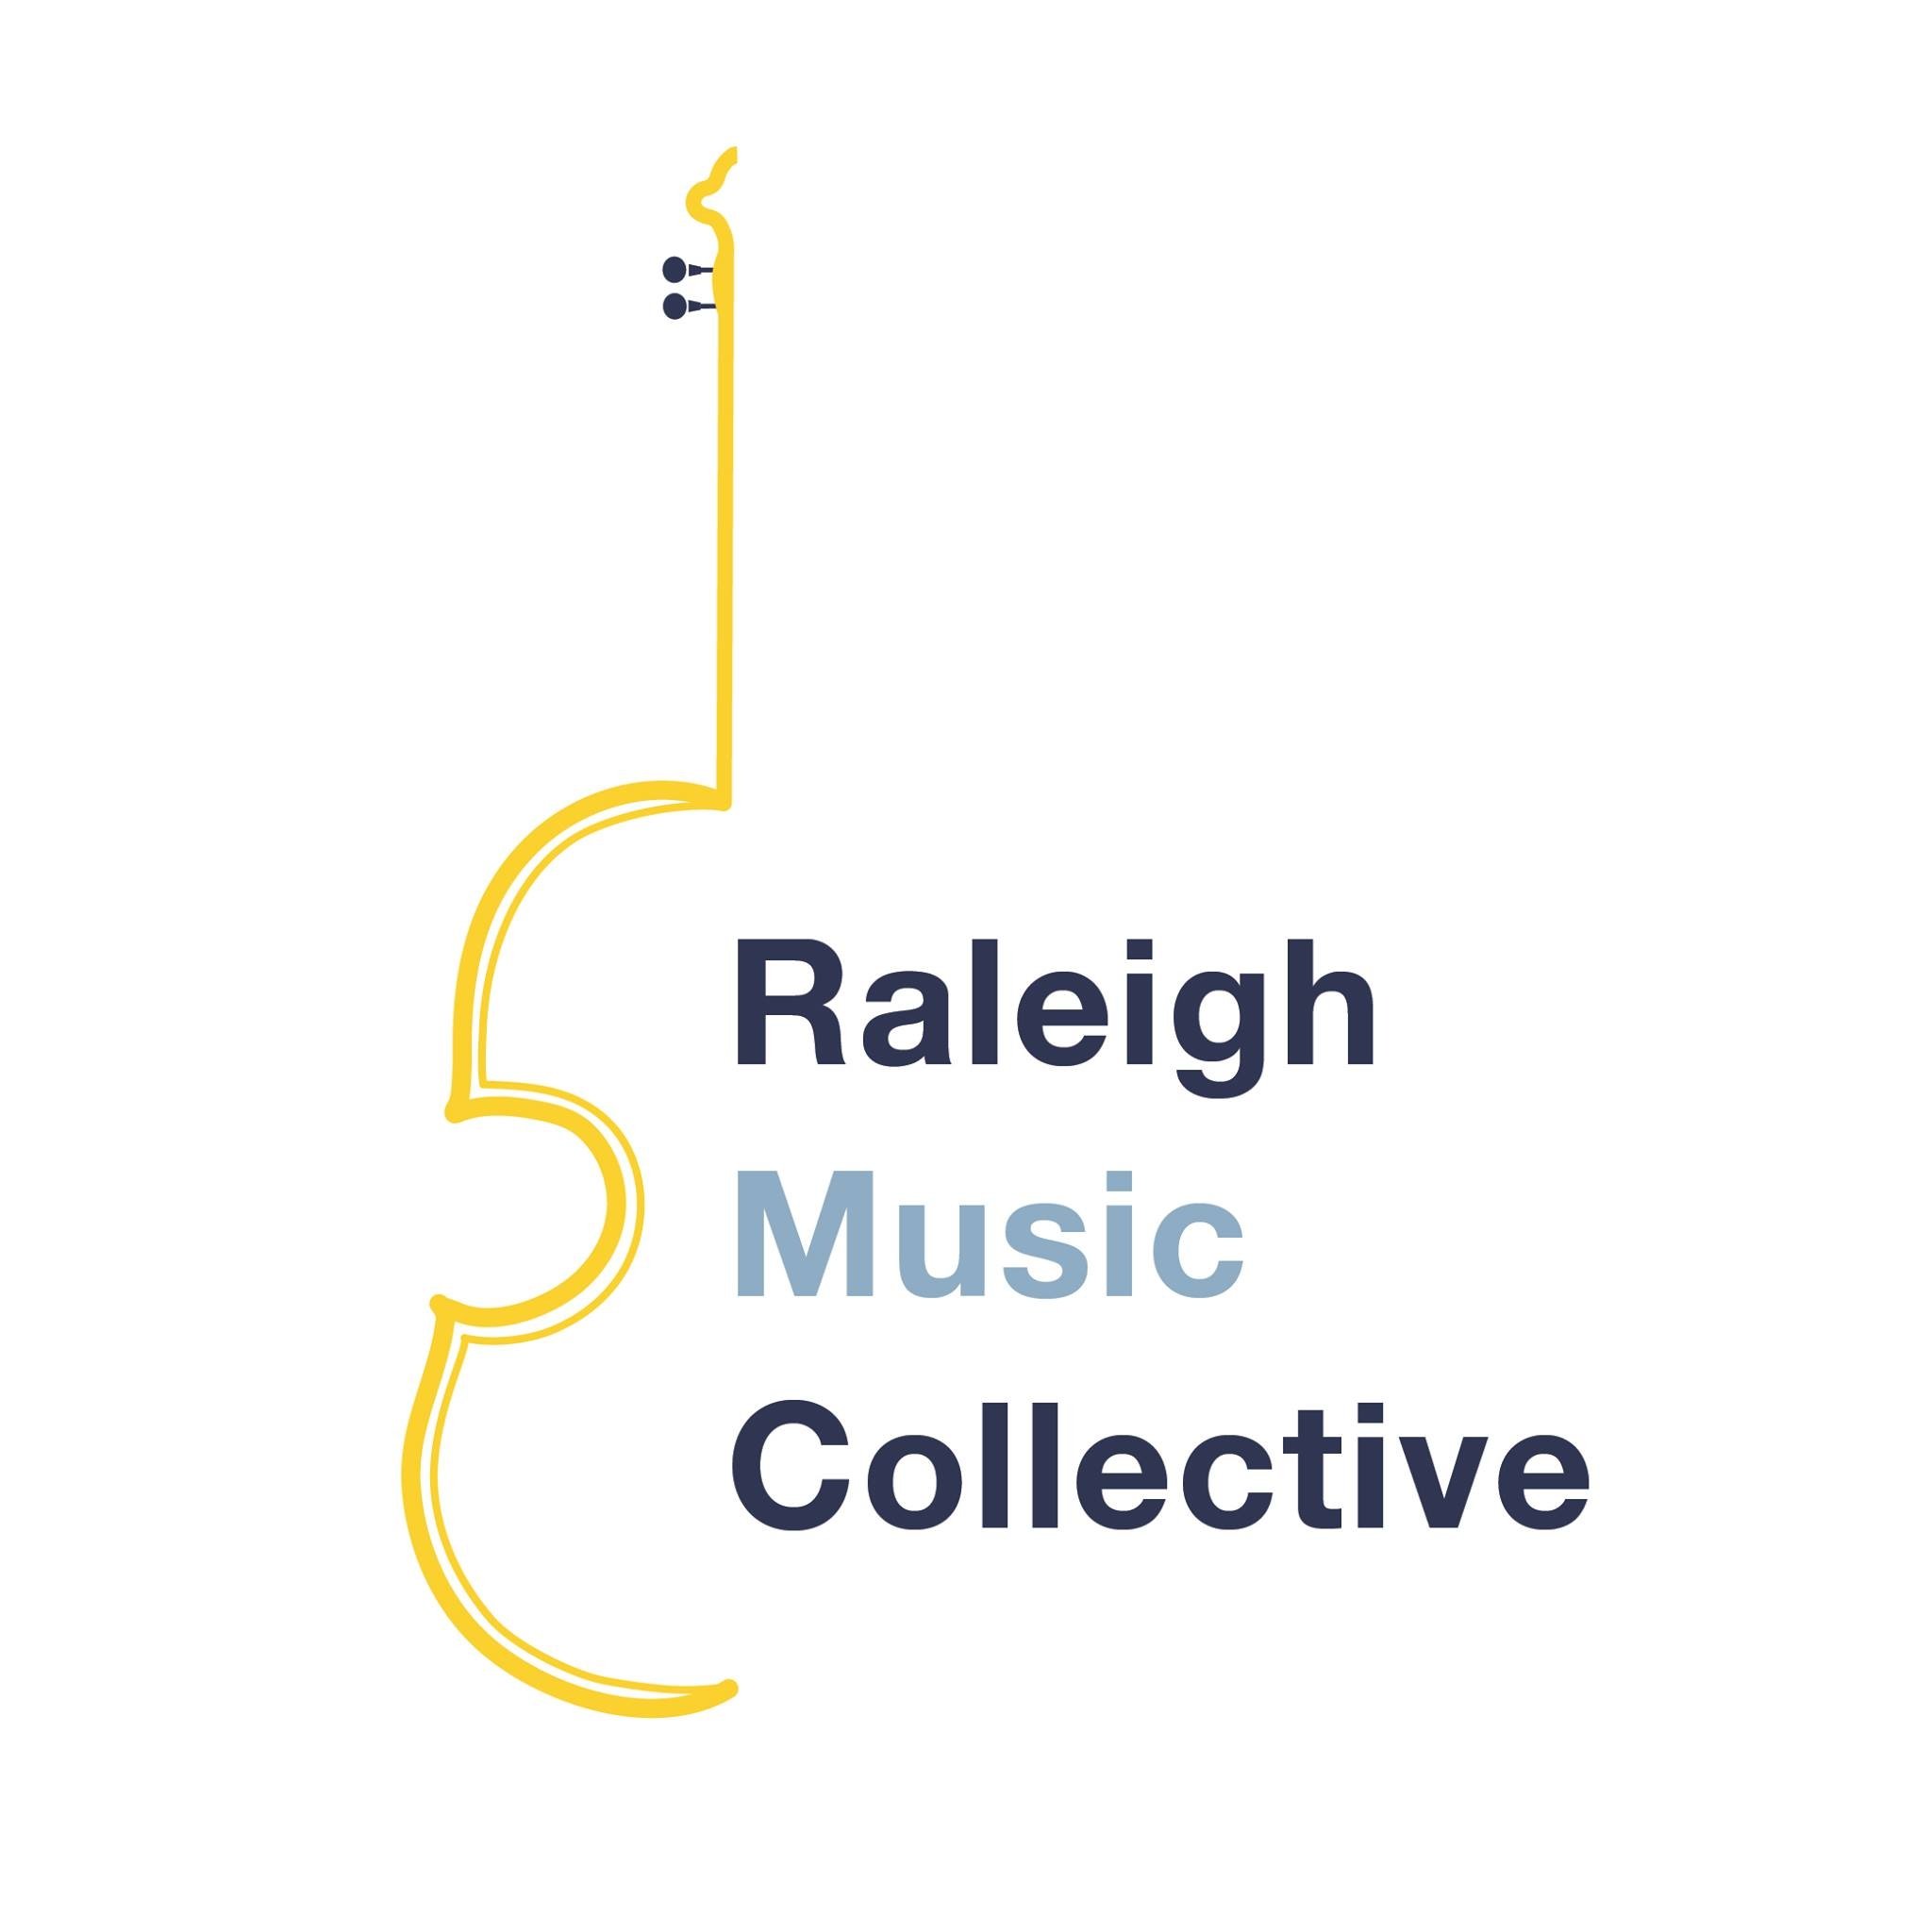 Raleigh Music Collective